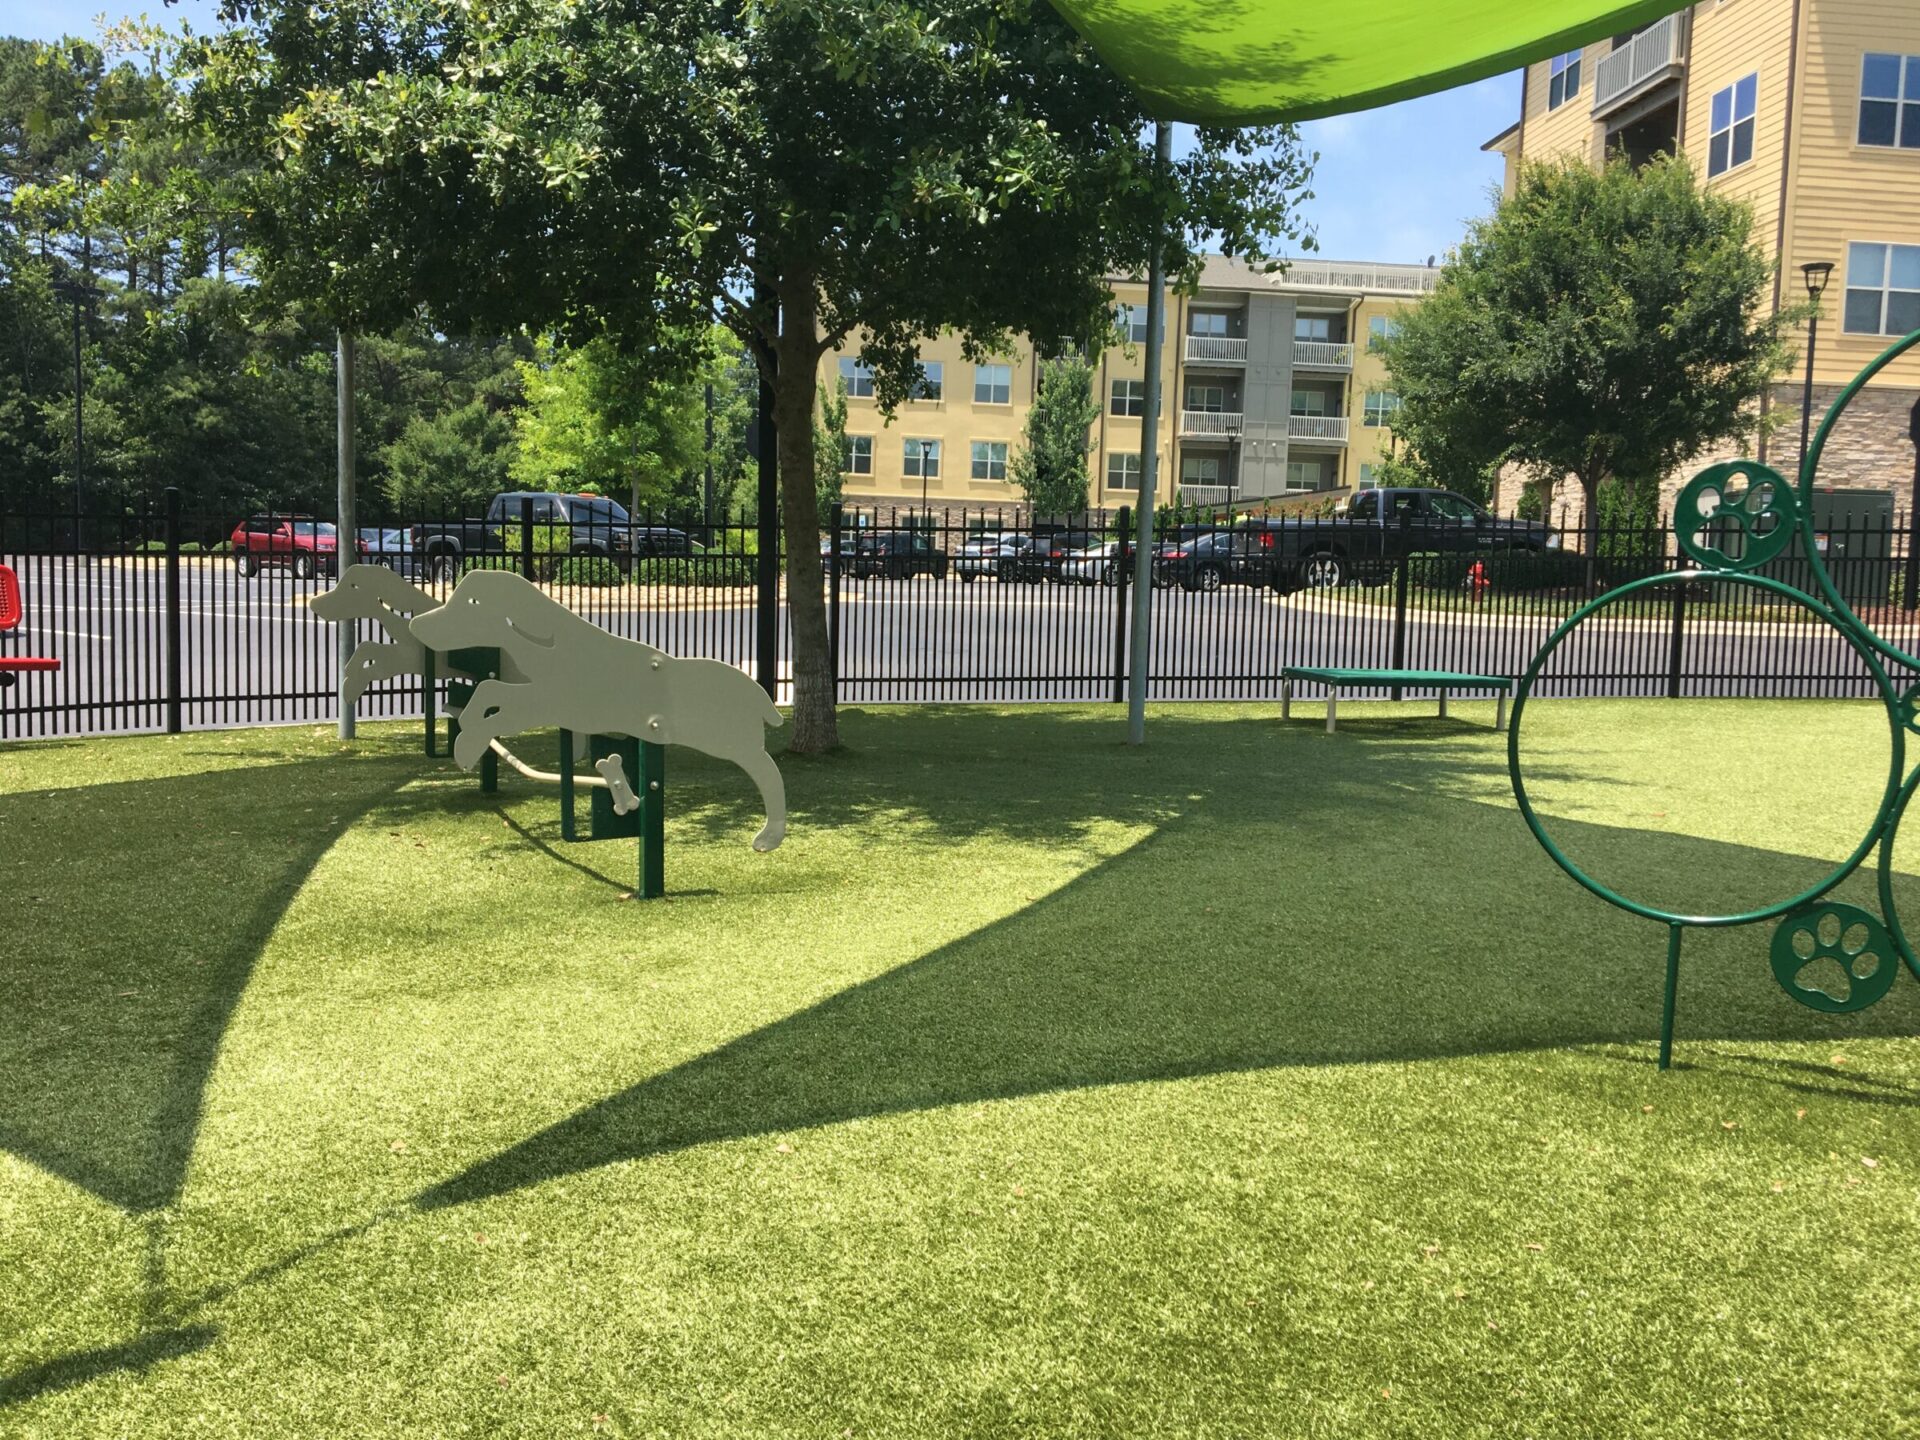 A sunny playground with artificial grass features a green dinosaur structure, agility rings, and a shaded area, surrounded by a fence with buildings behind.